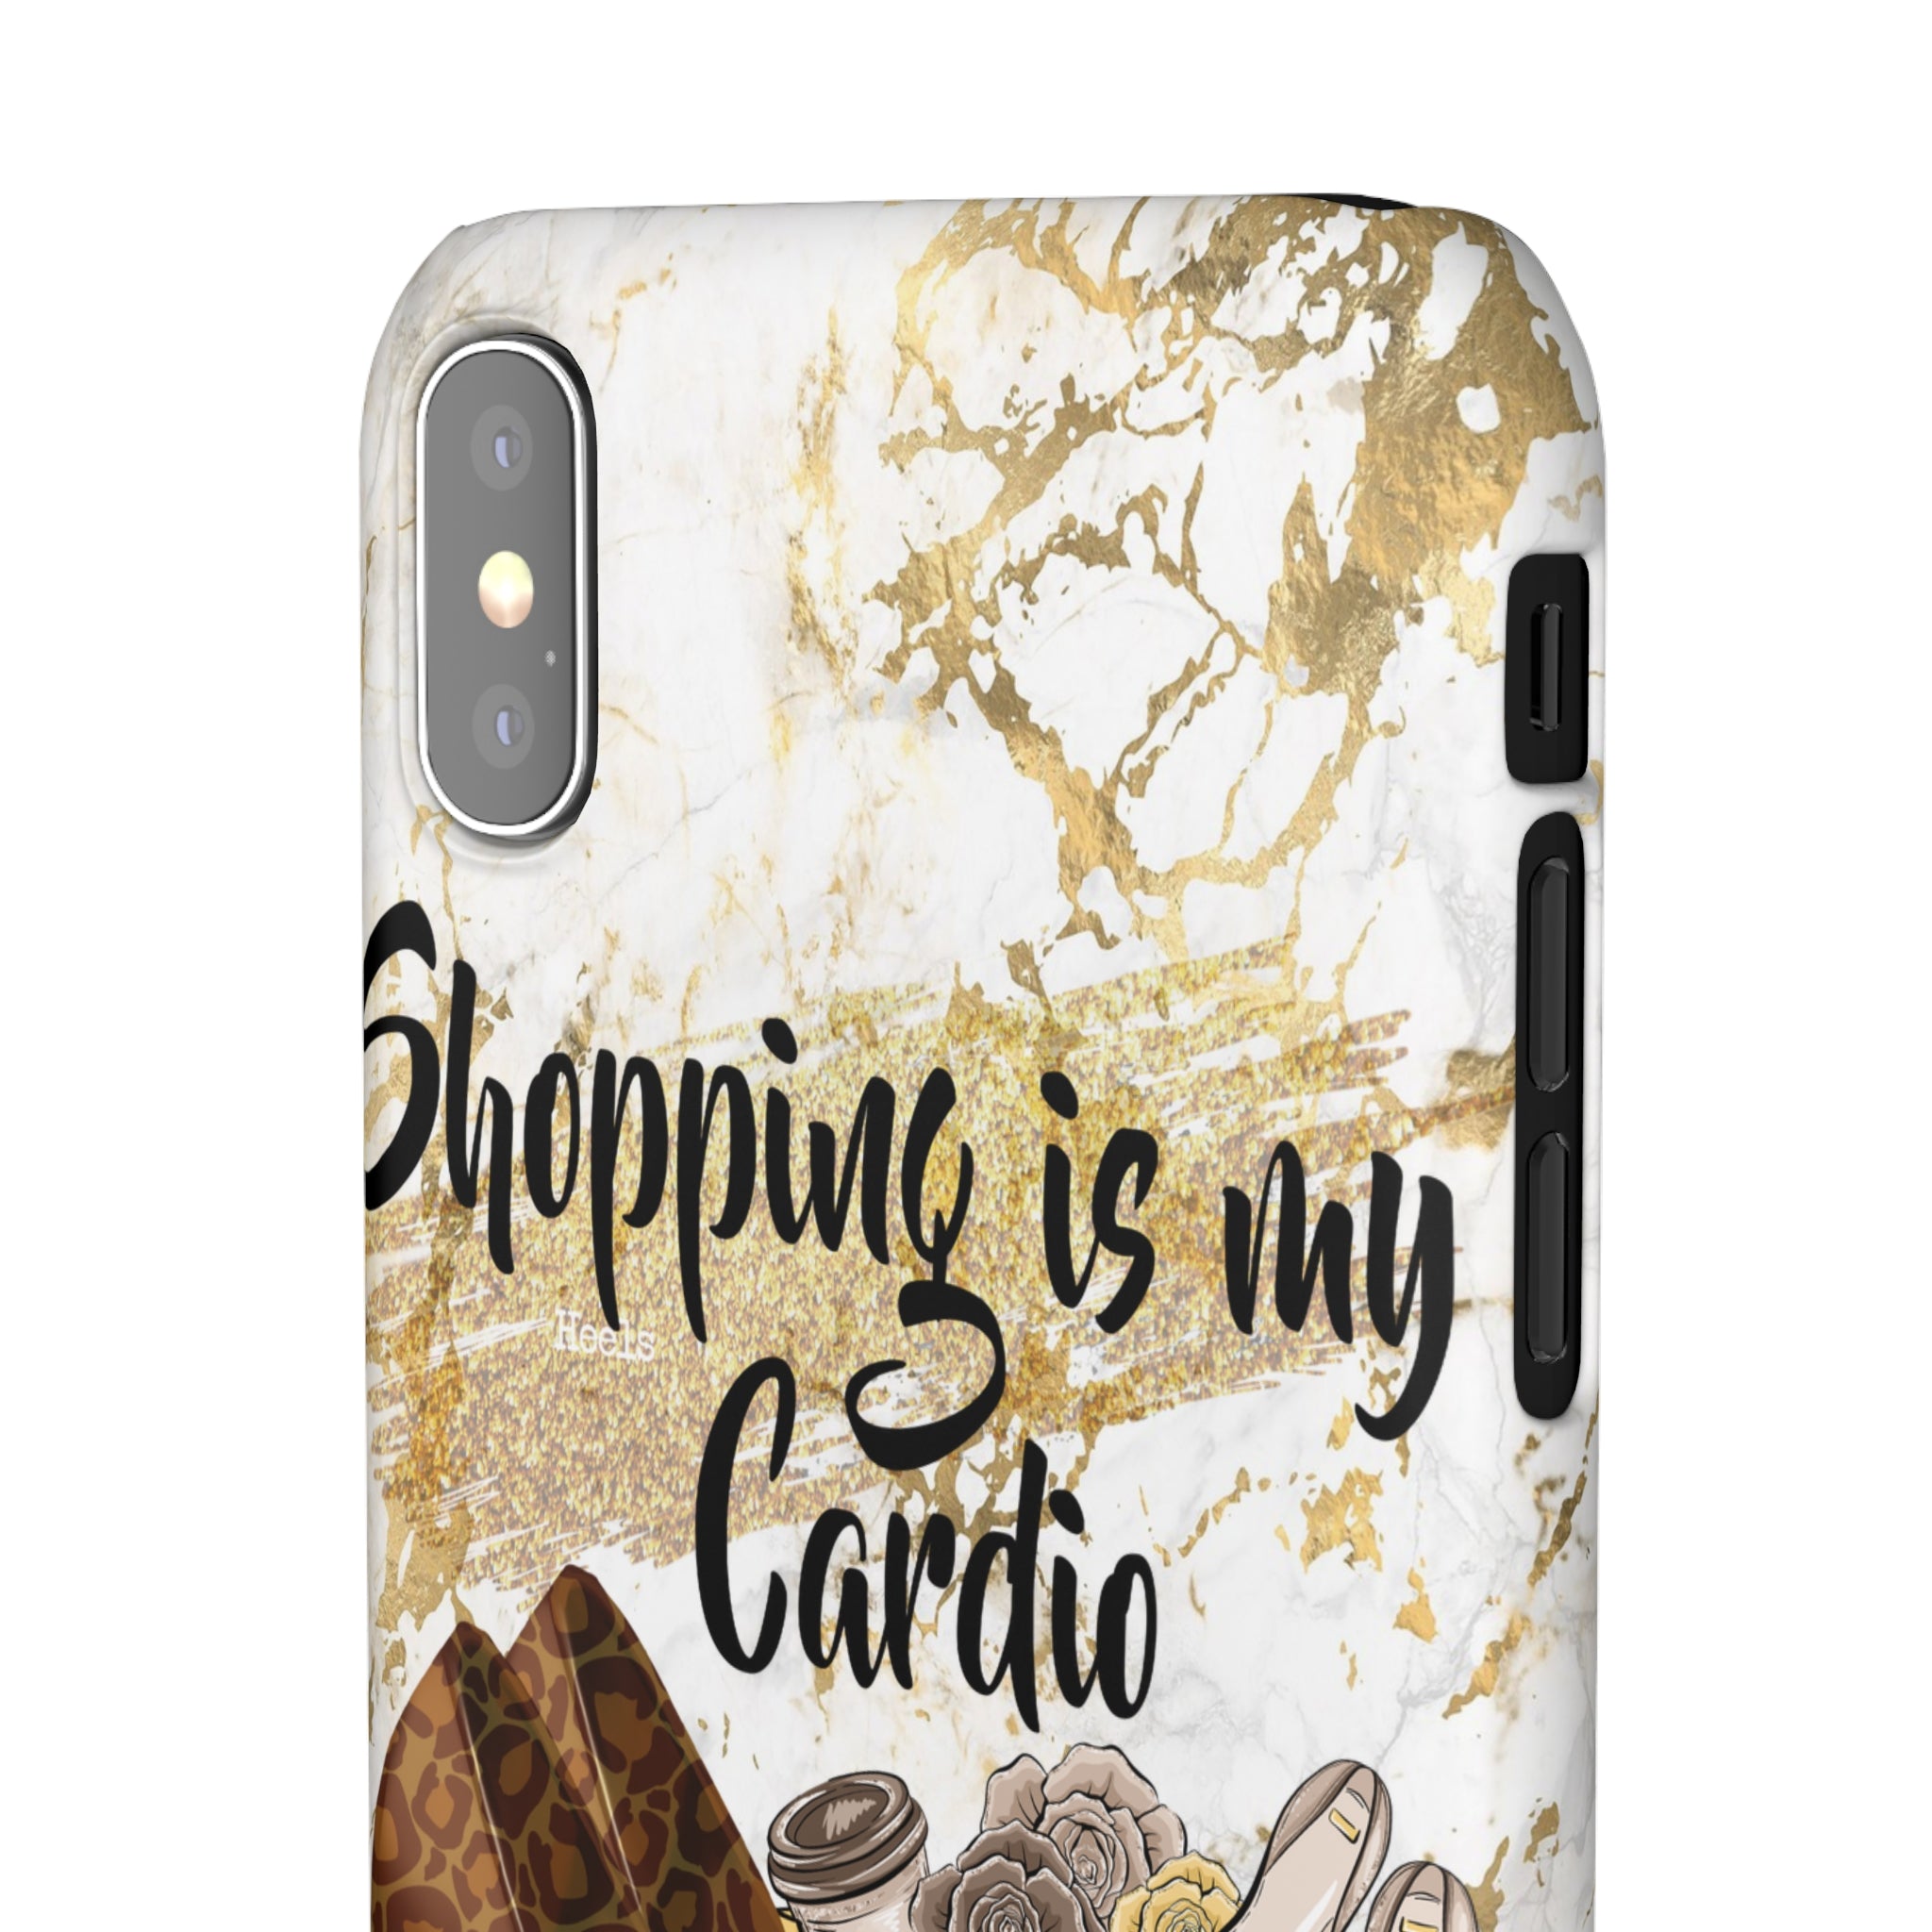 Shopping Is My Cardio Phone Case